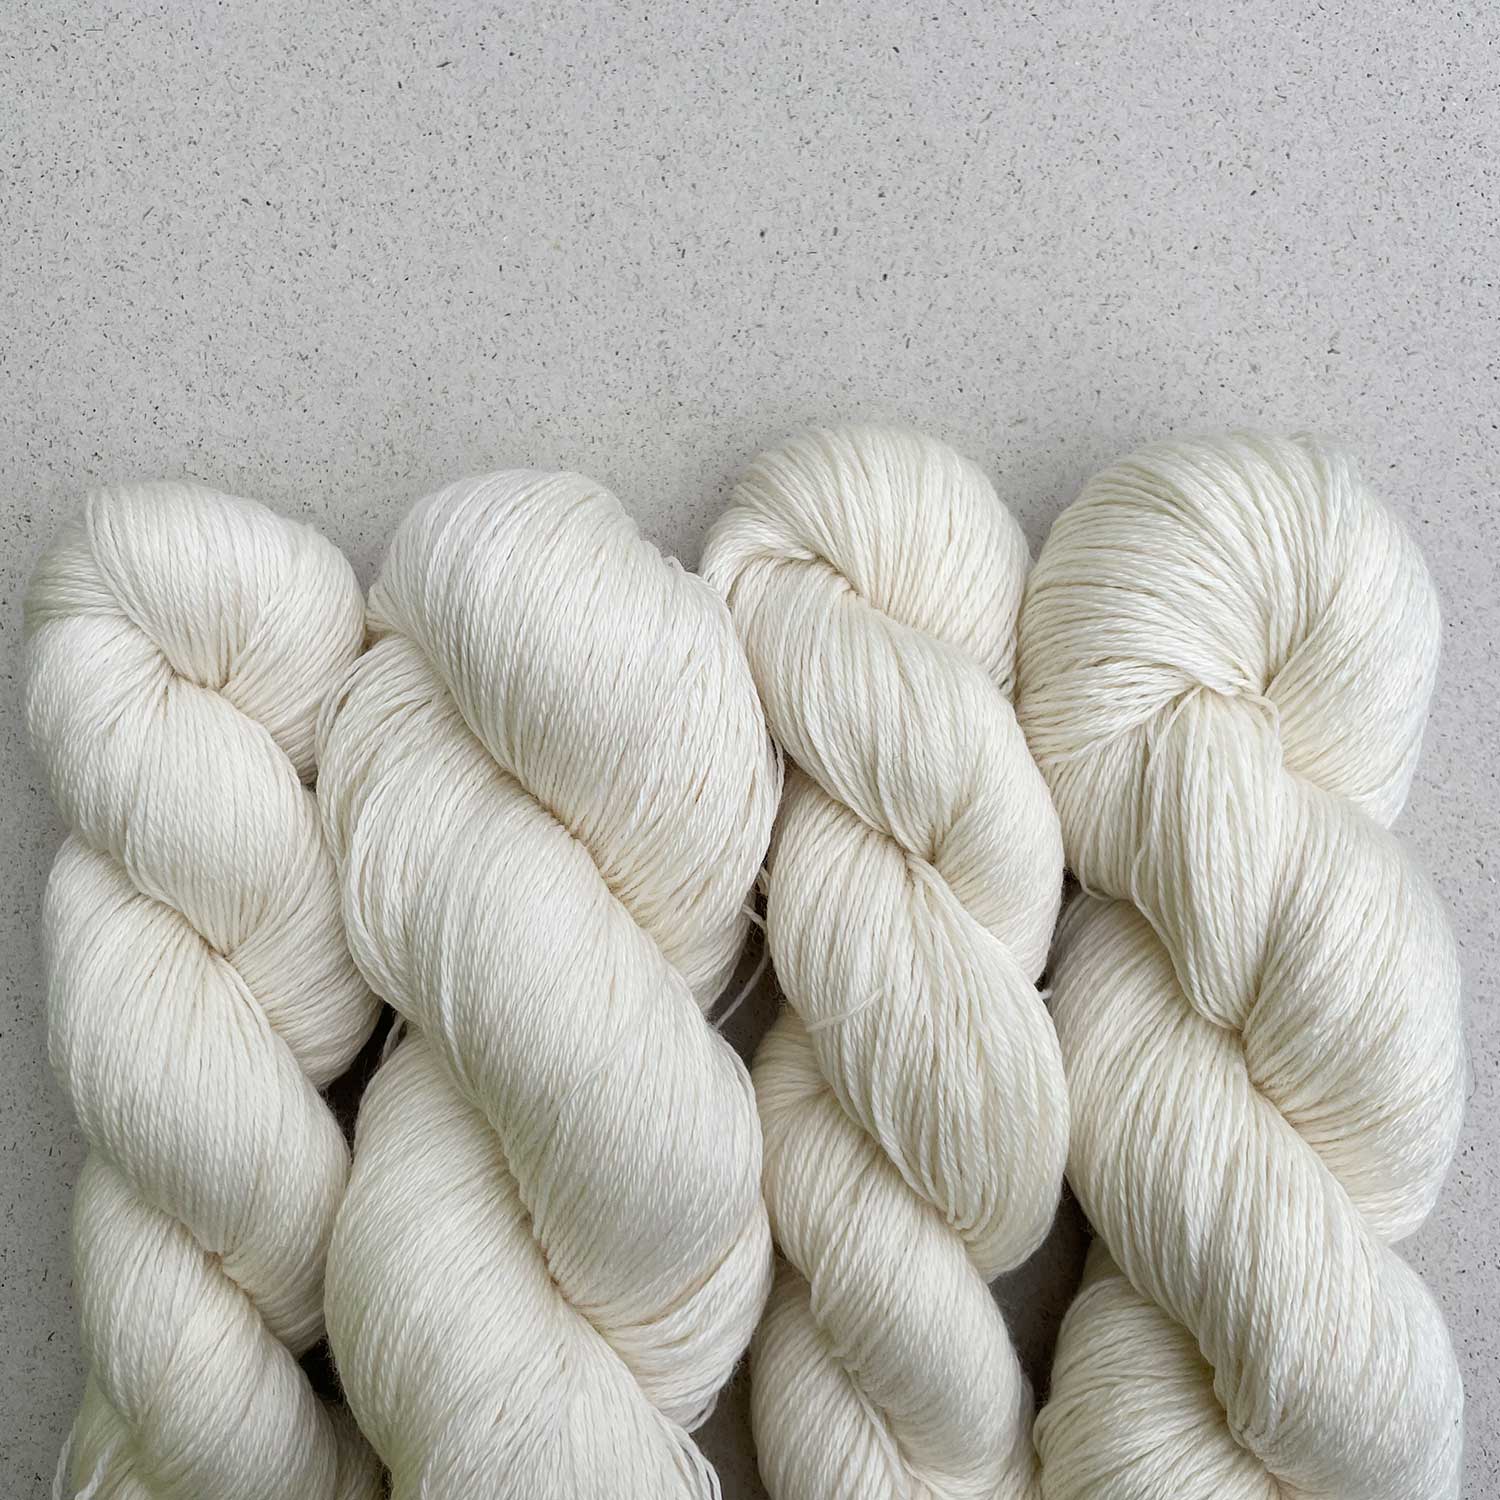 MERINO BABY LACE FOR DYEING | 100% VIRGIN WOOL